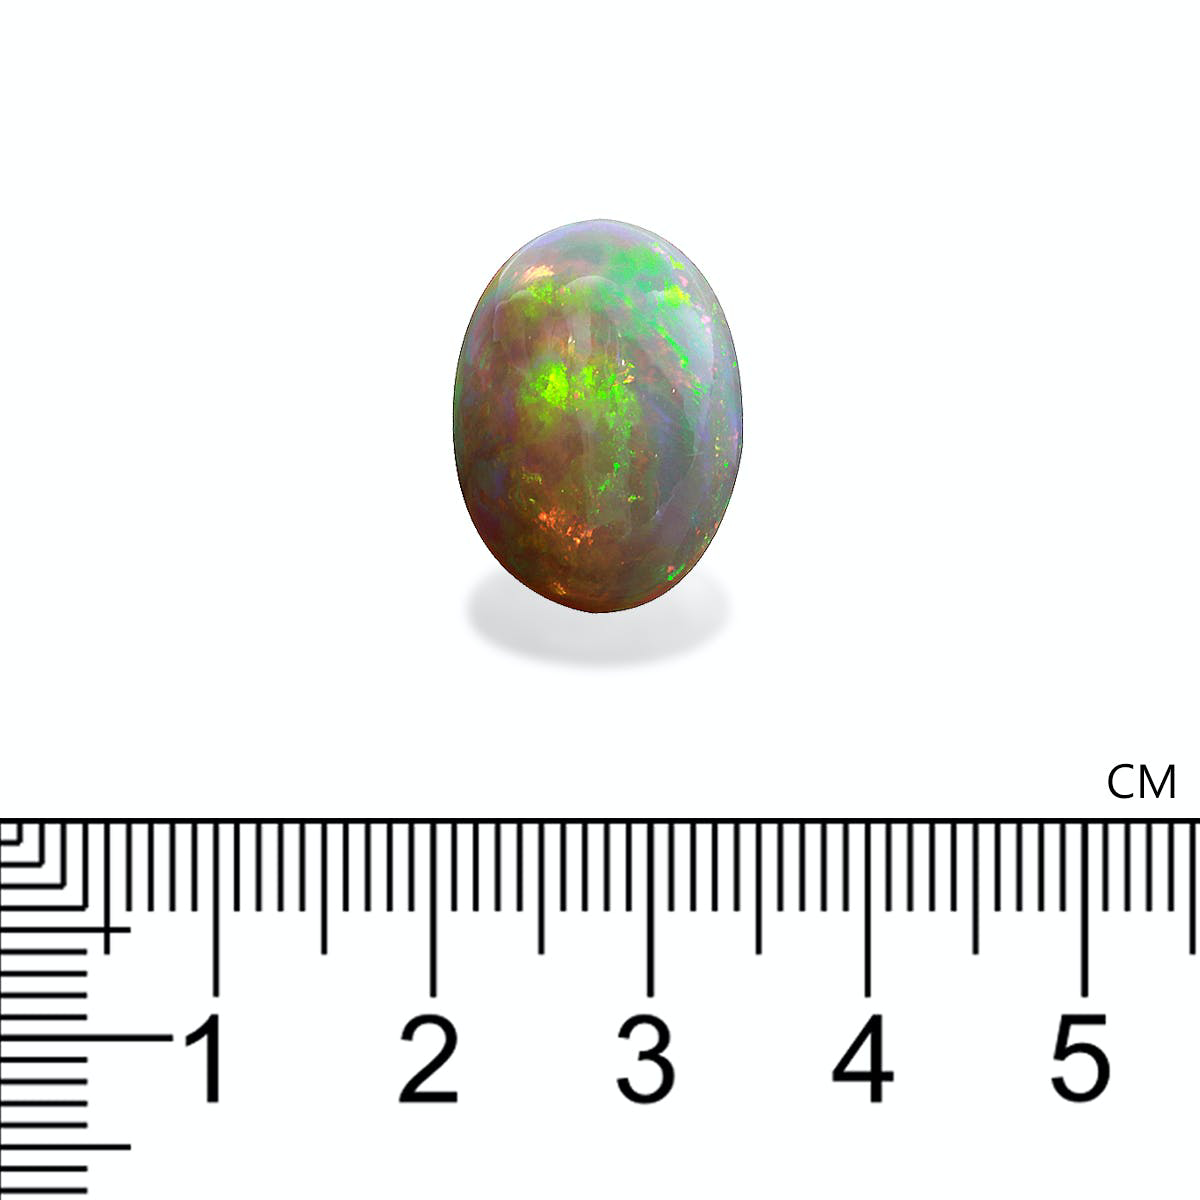 Picture of White Ethiopian Opal 9.22ct (OP0077)